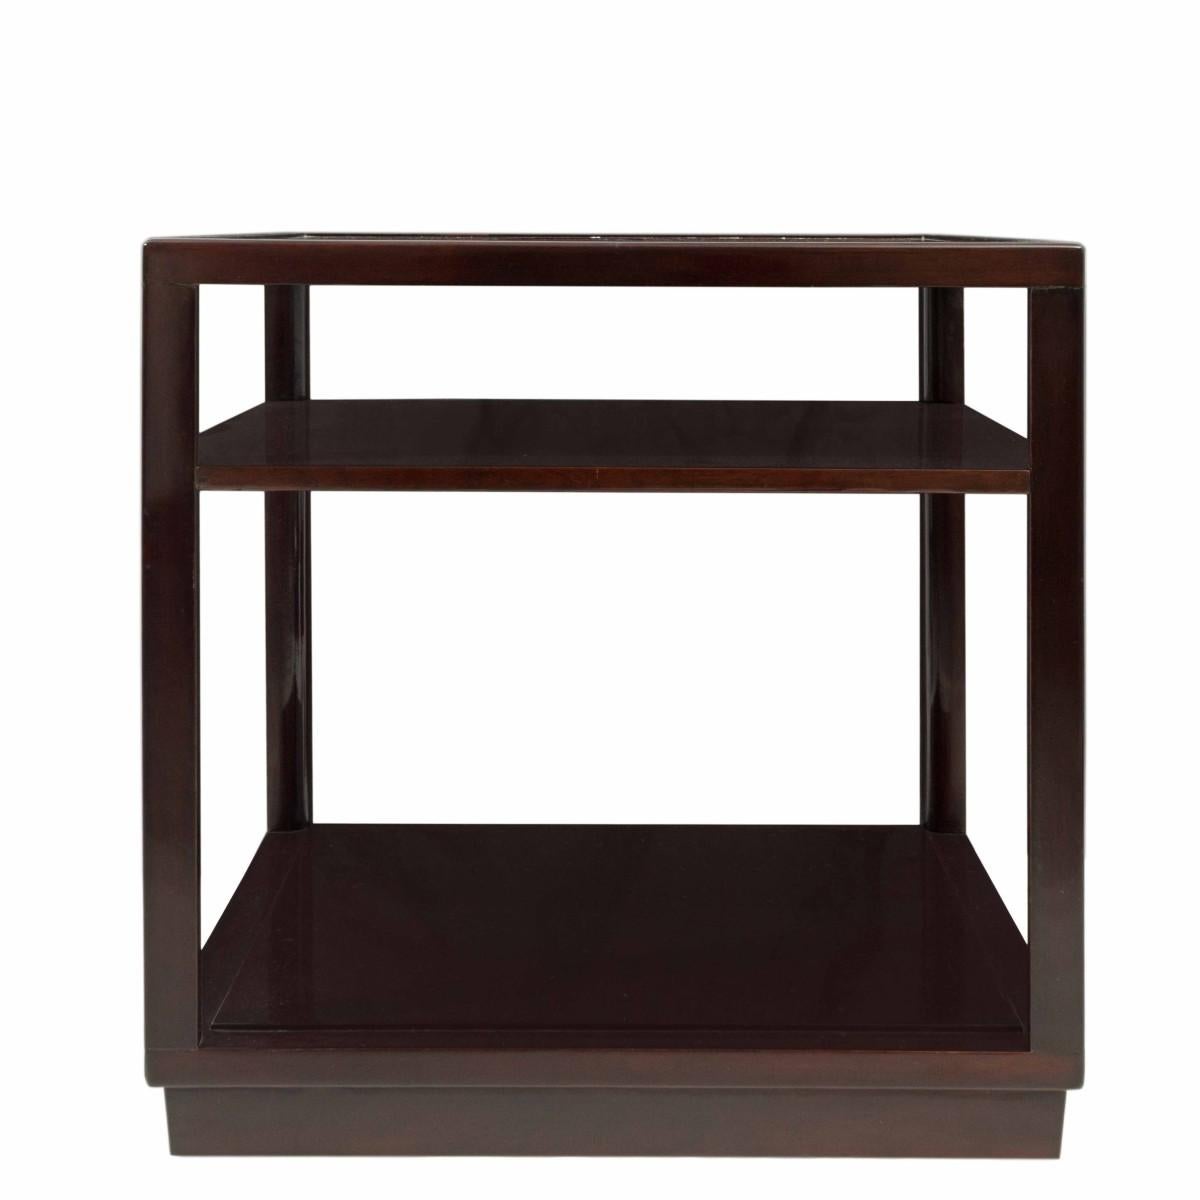 Pair of cube-shaped, three-level end tables by Edward Wormley for Dunbar, signed, USA, circa 1950.

Professionally refinished in dark chocolate brown. Very good to excellent condition.

Dimensions:
23 inches L
23 inces W
23 inches H.